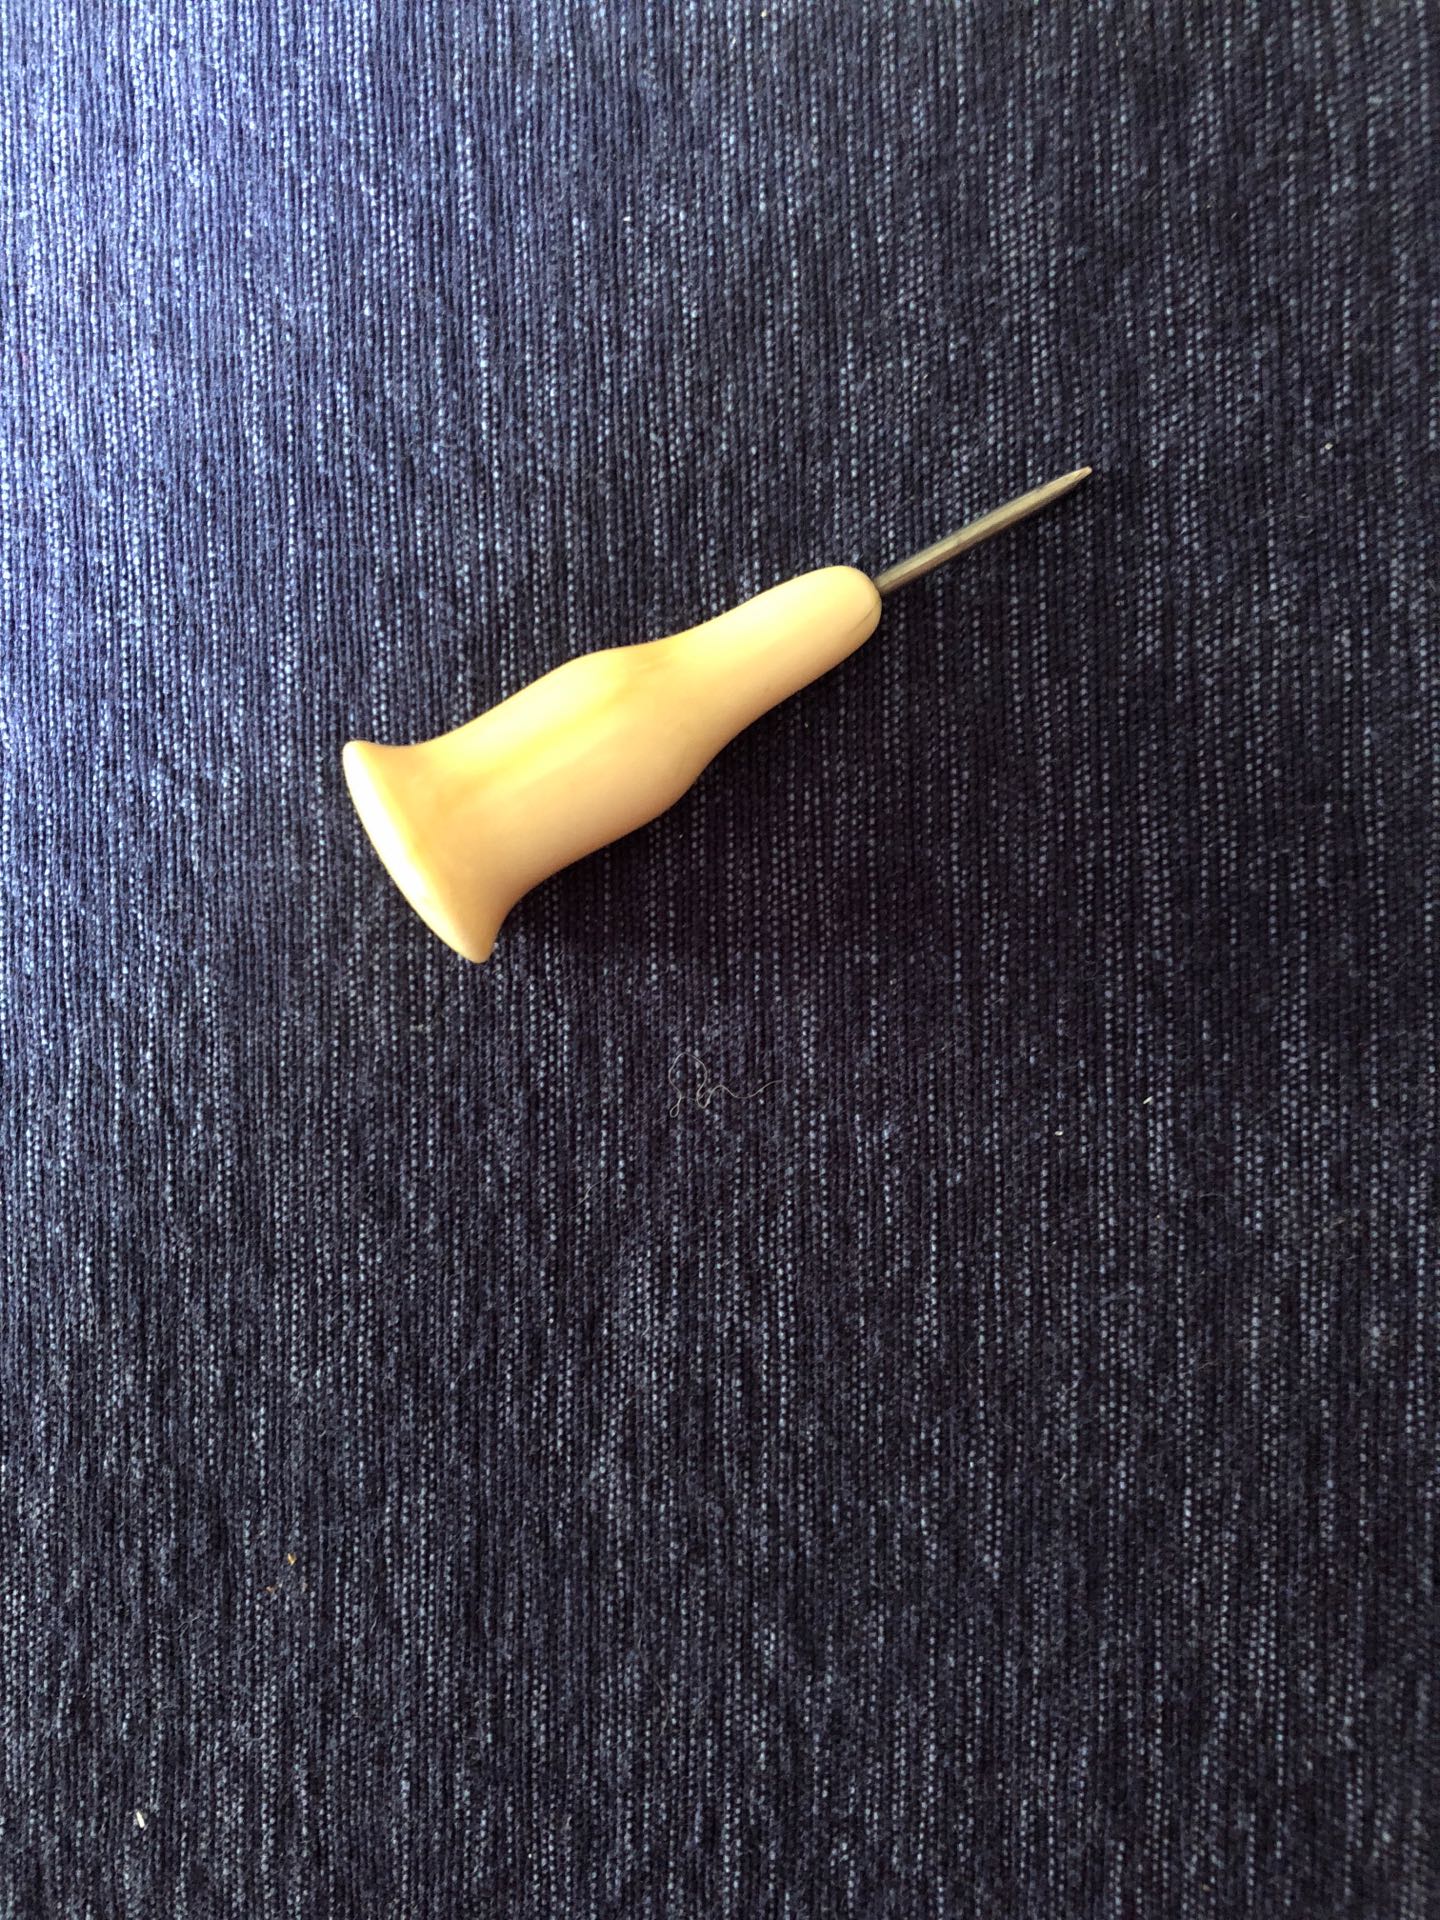 An ivory-handled stylus used by the blind jazz musician, George Shearing, at the school for the blind in England in the 1920s.